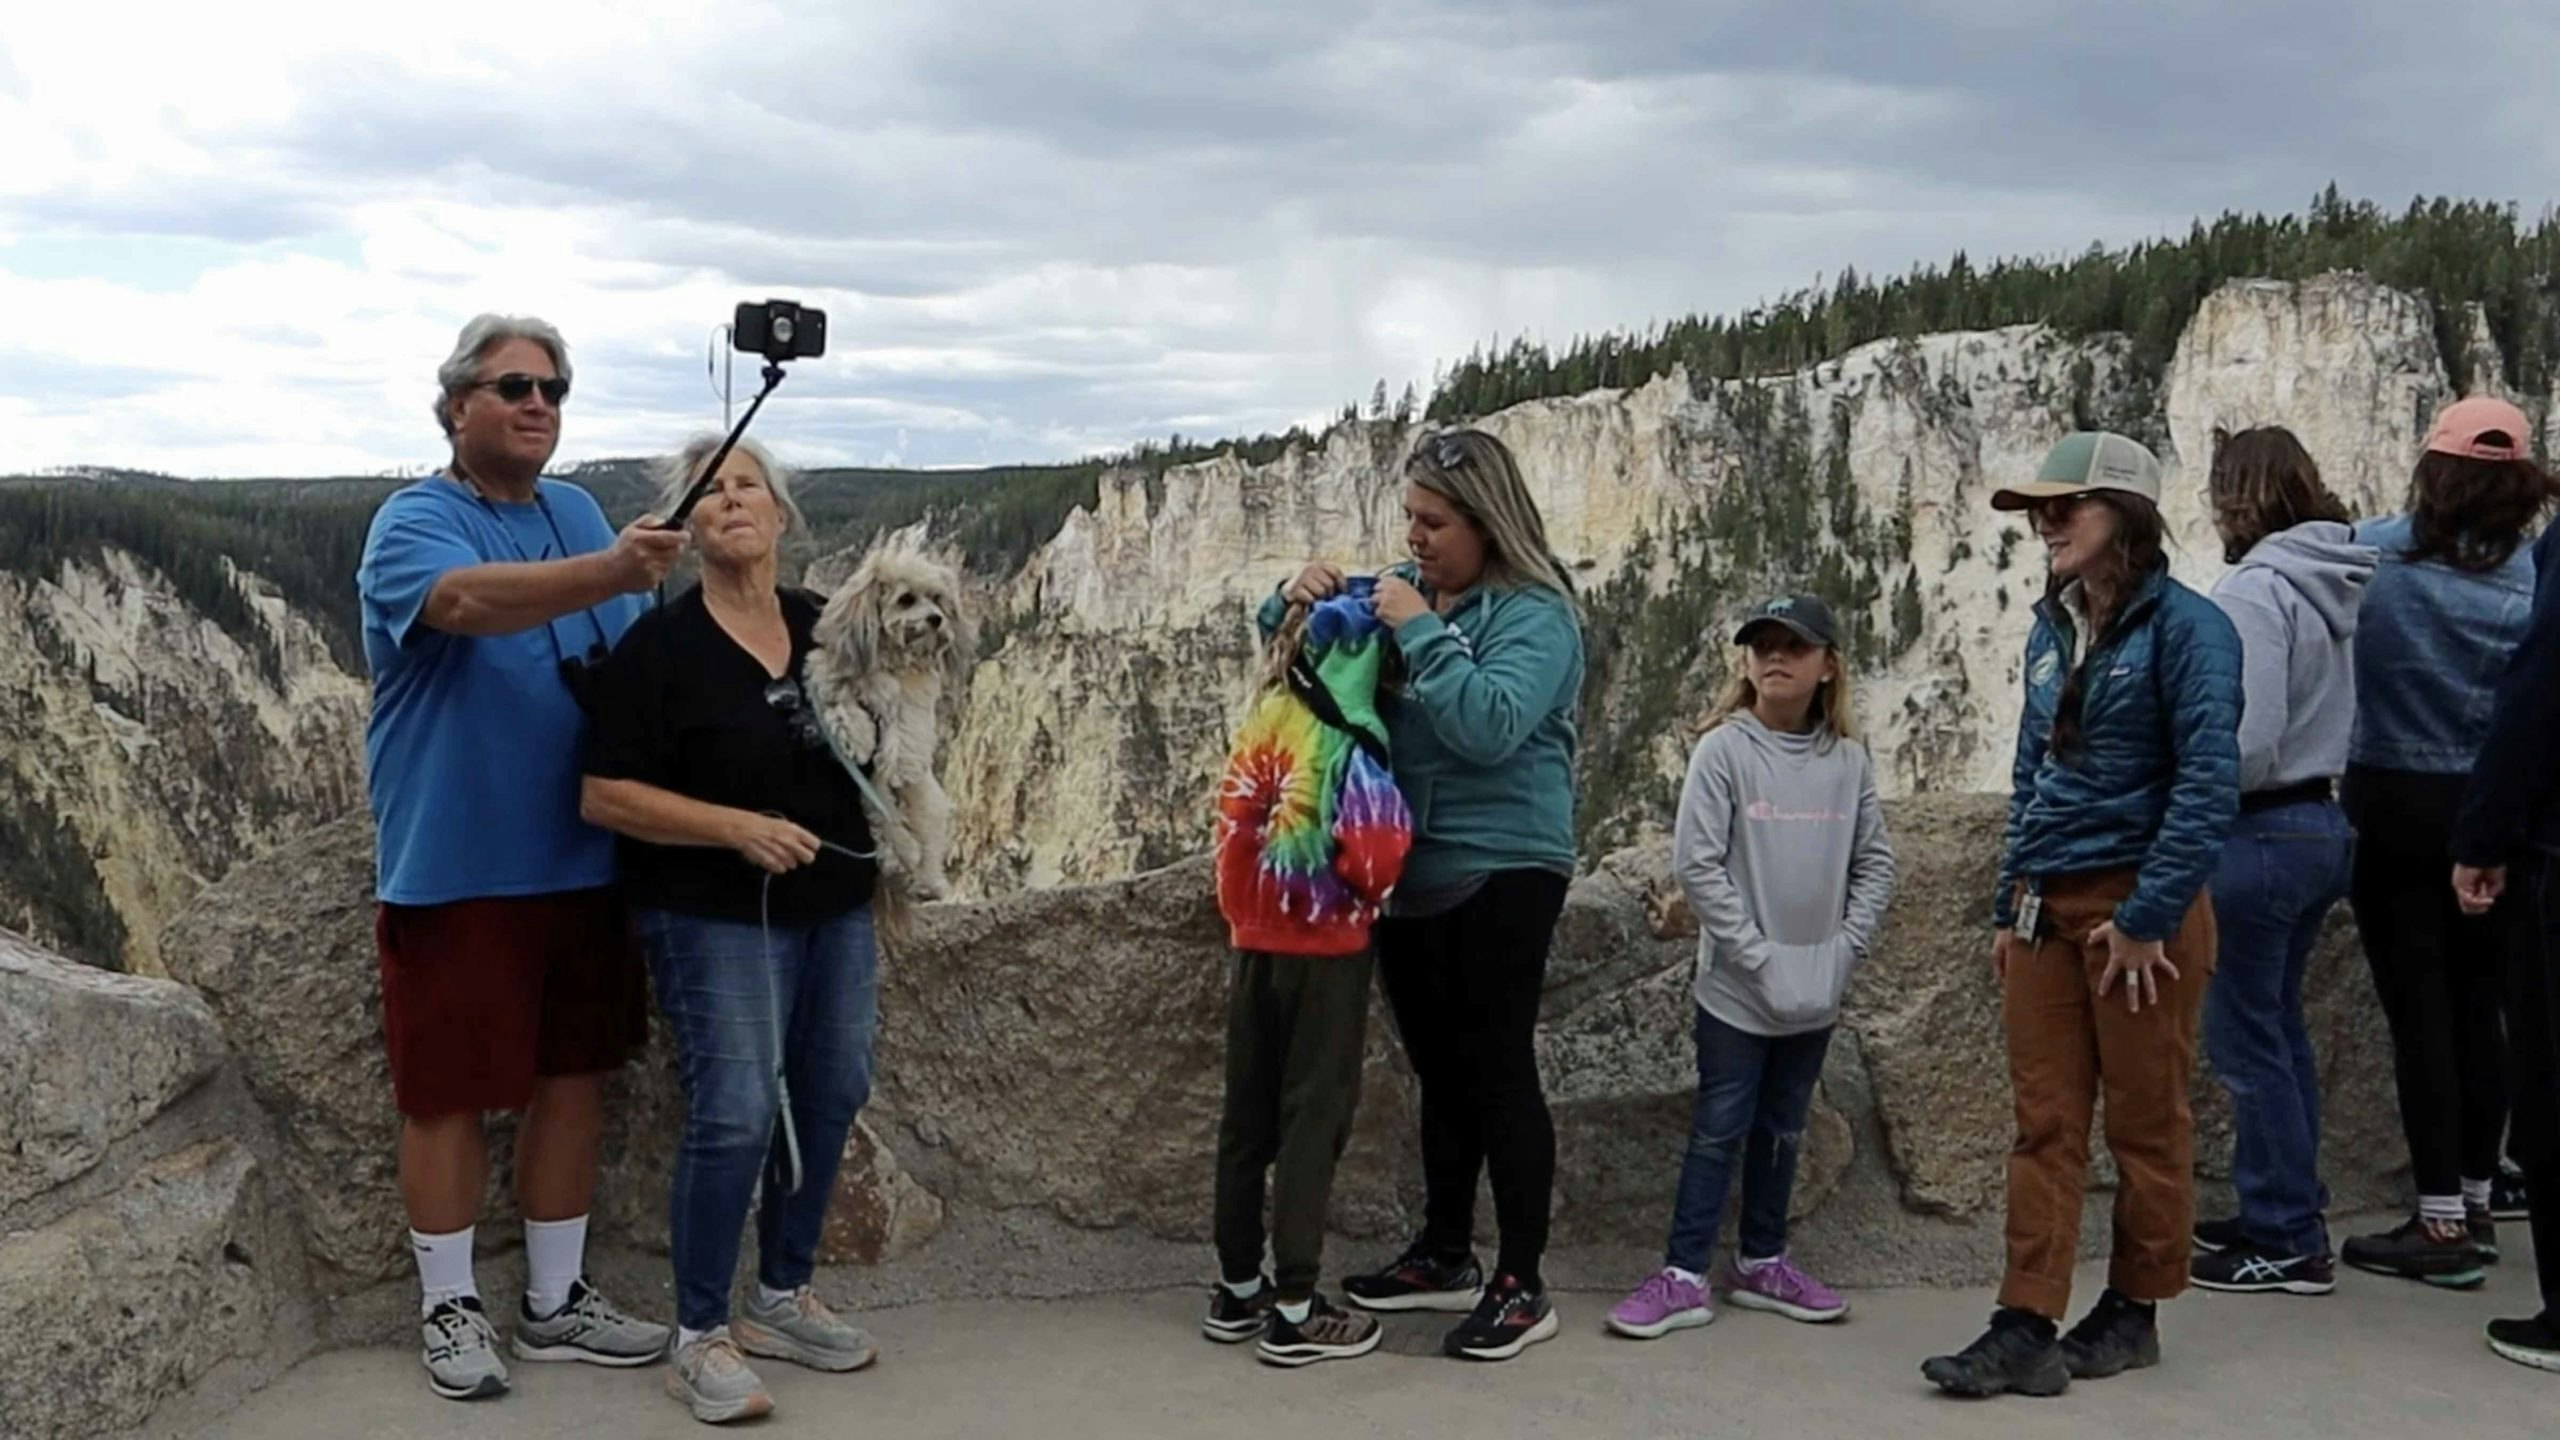 Yellowstone family 6 27 22 scaled